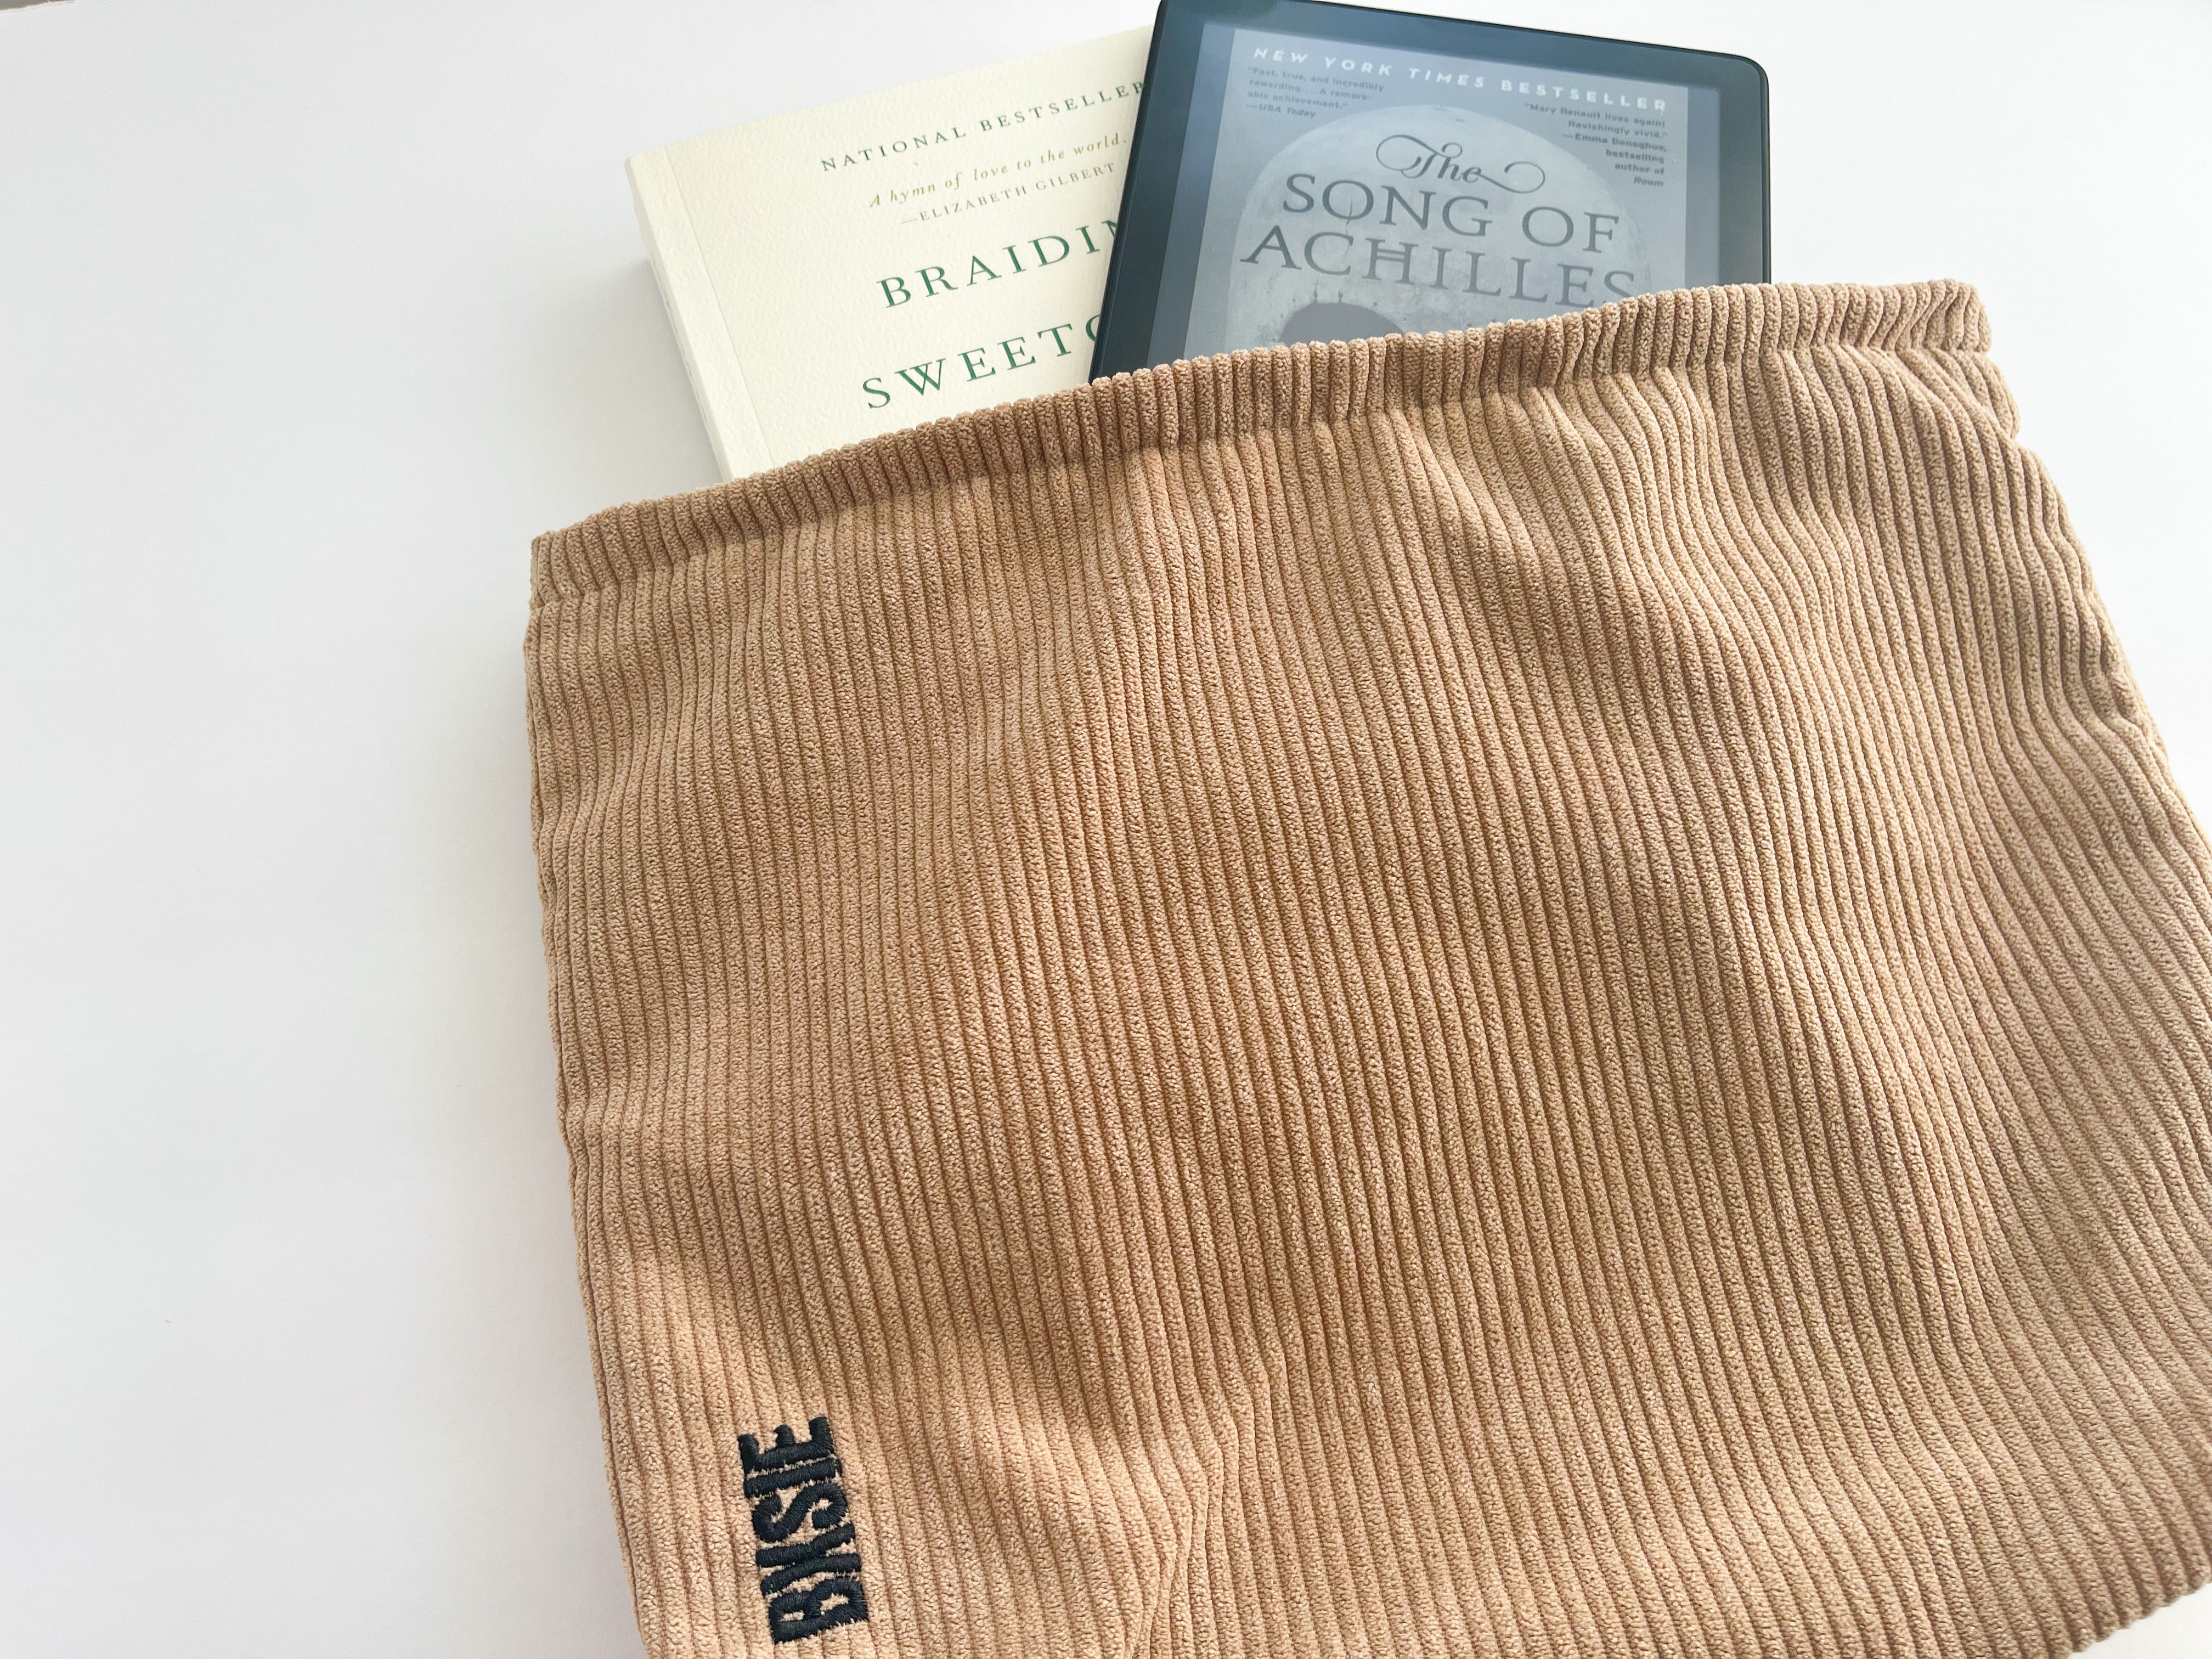 corduroy book sleeve pouch with zipper, front side close up